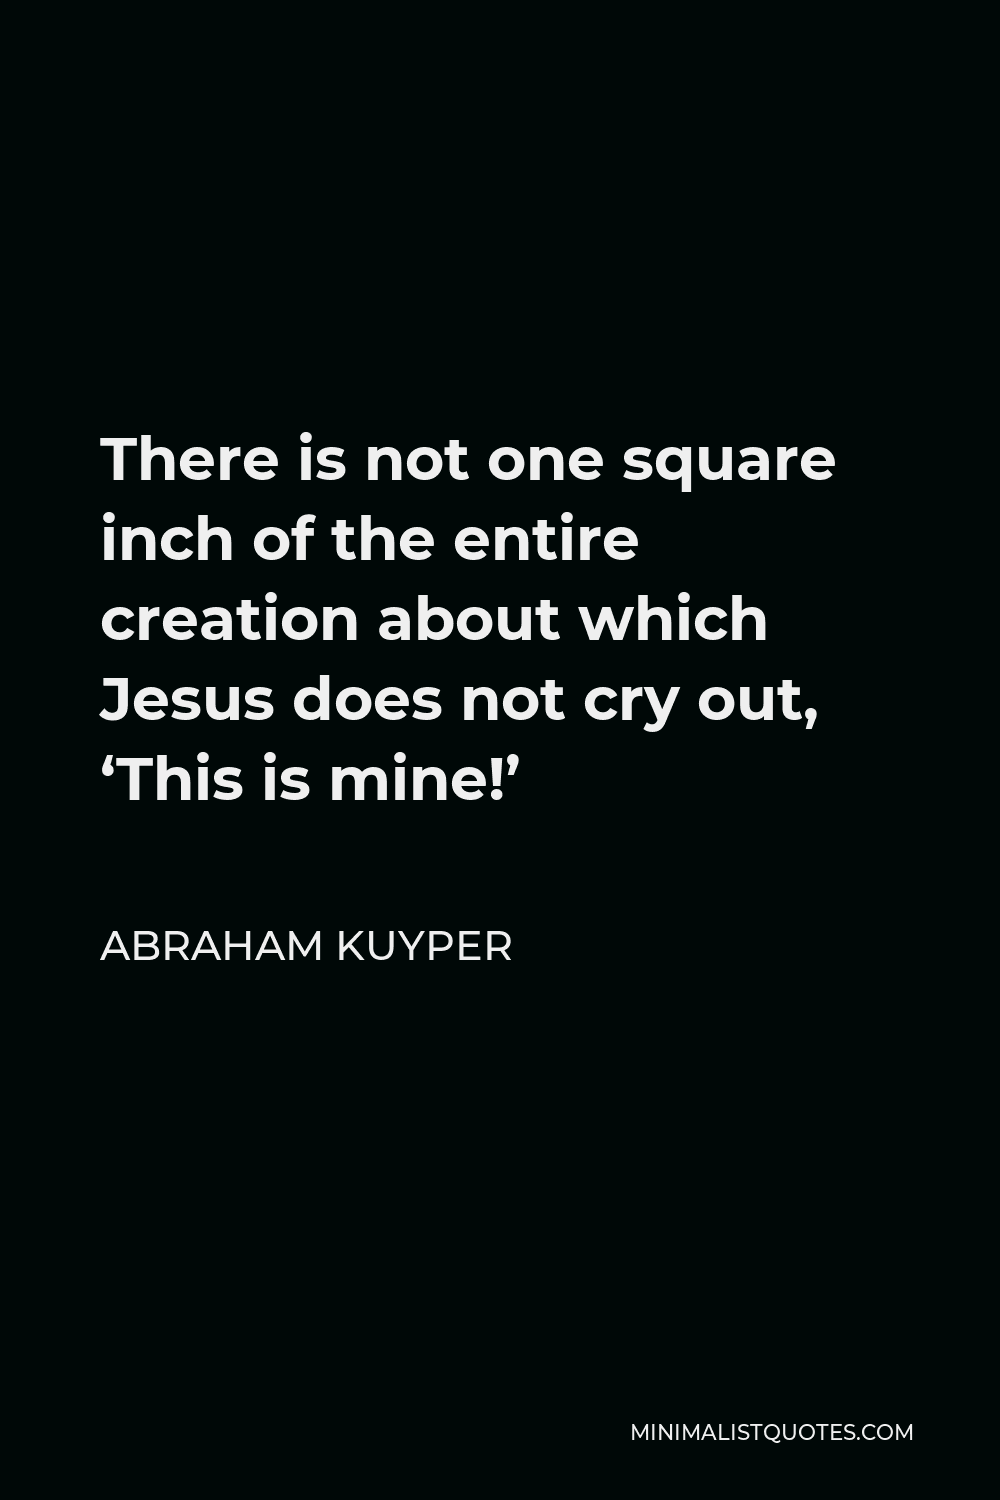 Abraham Kuyper Quote - There is not one square inch of the entire creation about which Jesus does not cry out, ‘This is mine!’